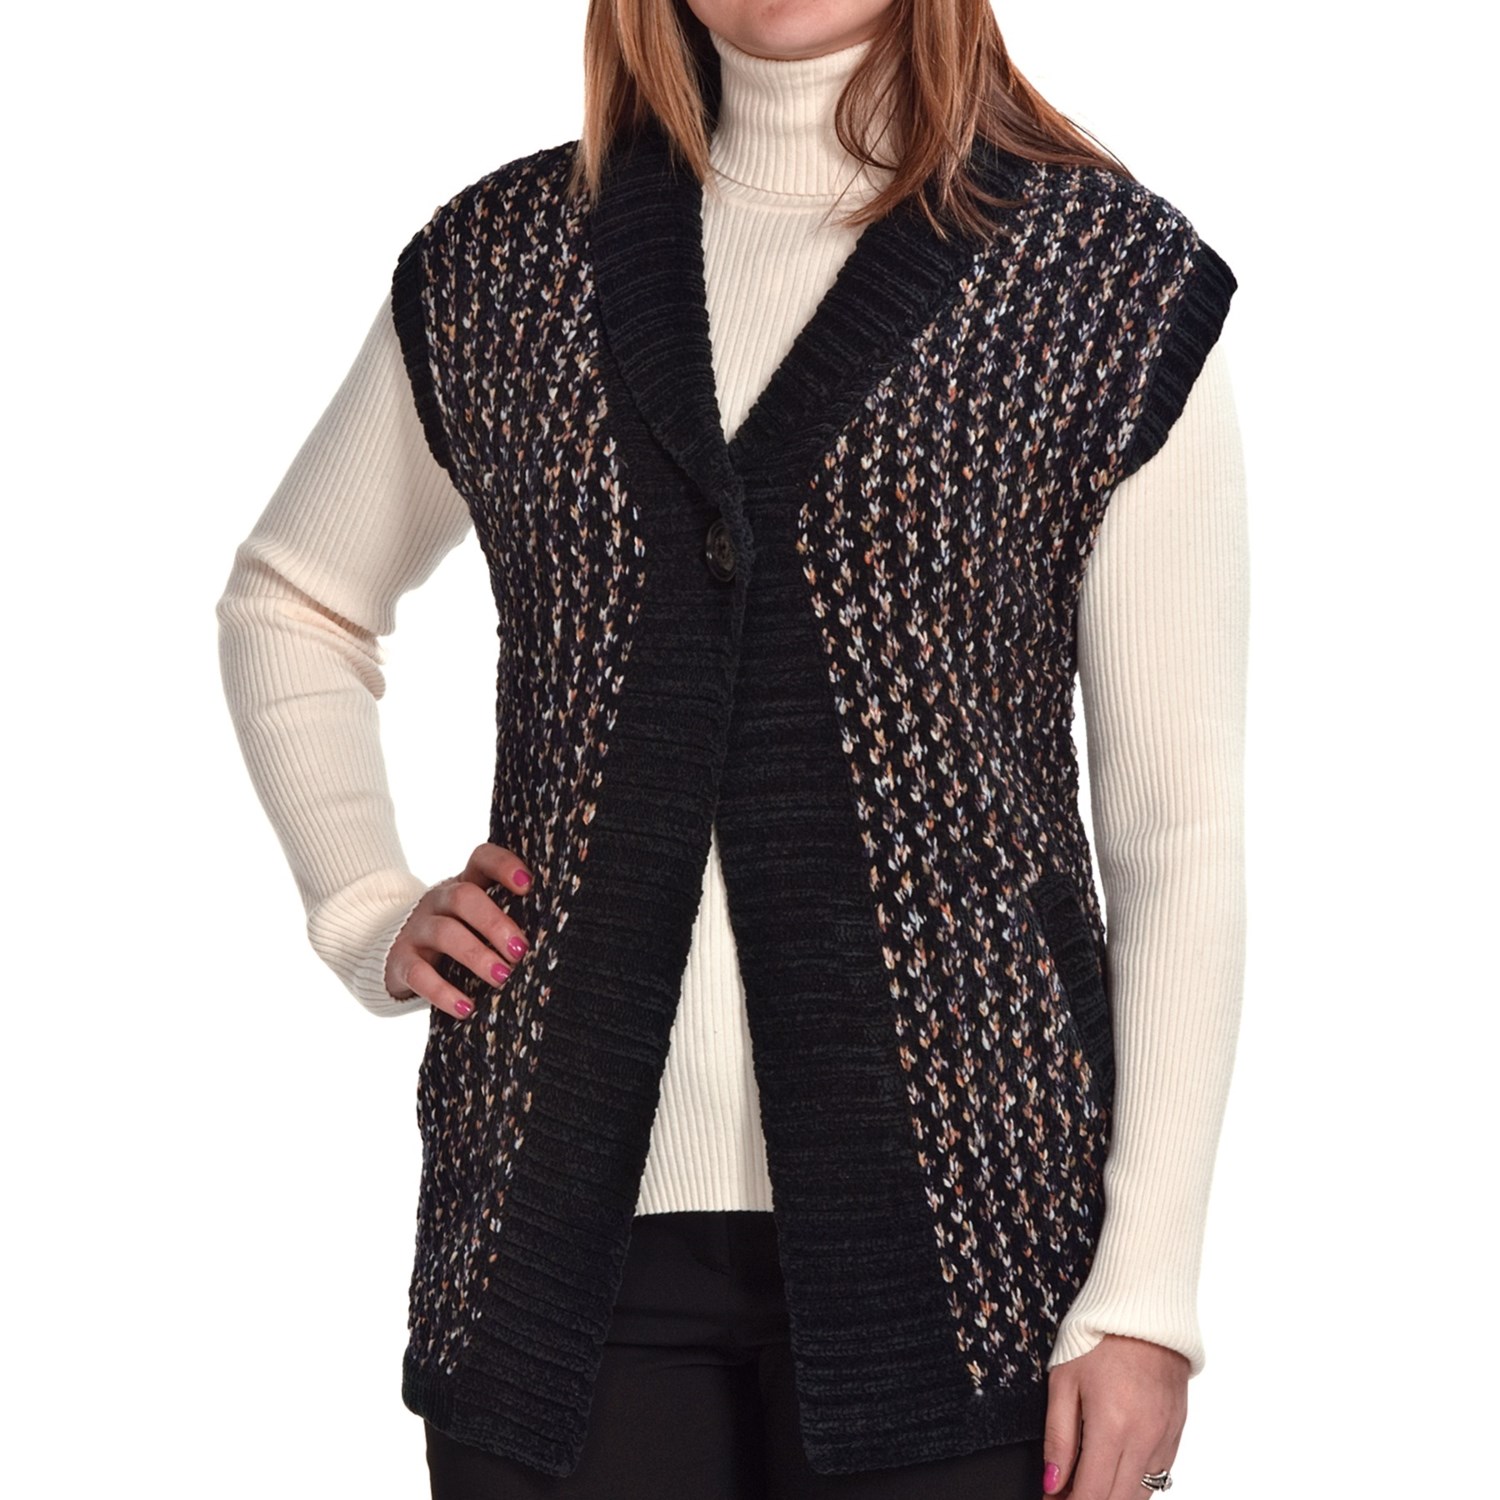 Apropos Putney Tweed Vest (For Women) 3708A - Save 91%